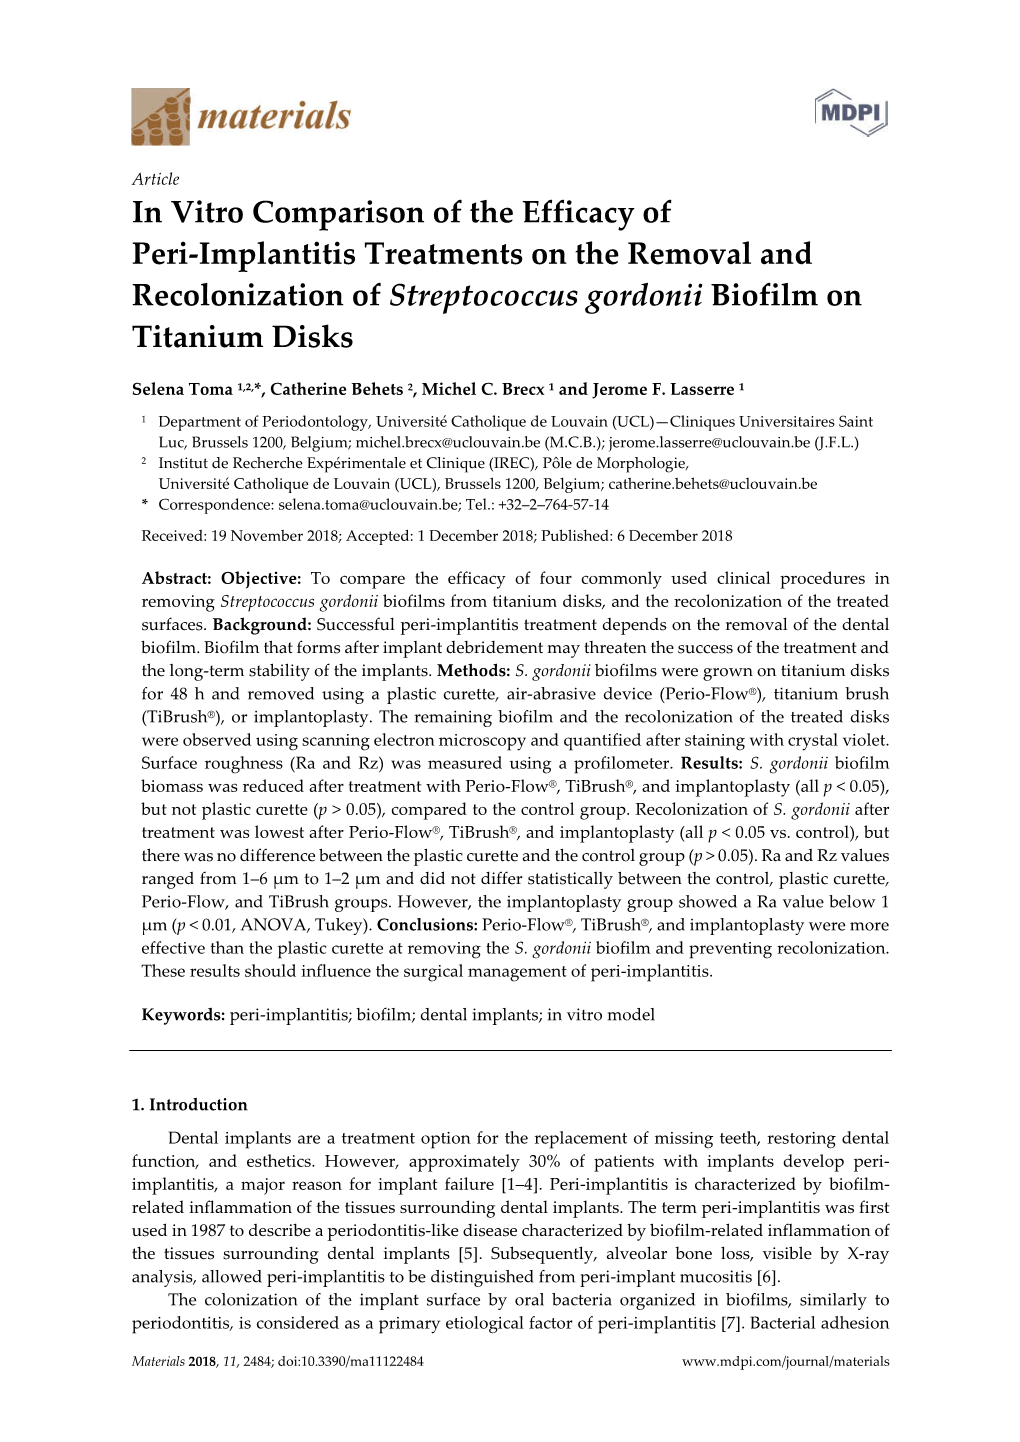 In Vitro Comparison of the Efficacy of Peri-Implantitis Treatments on the Removal and Recolonization of Streptococcus Gordonii Biofilm on Titanium Disks